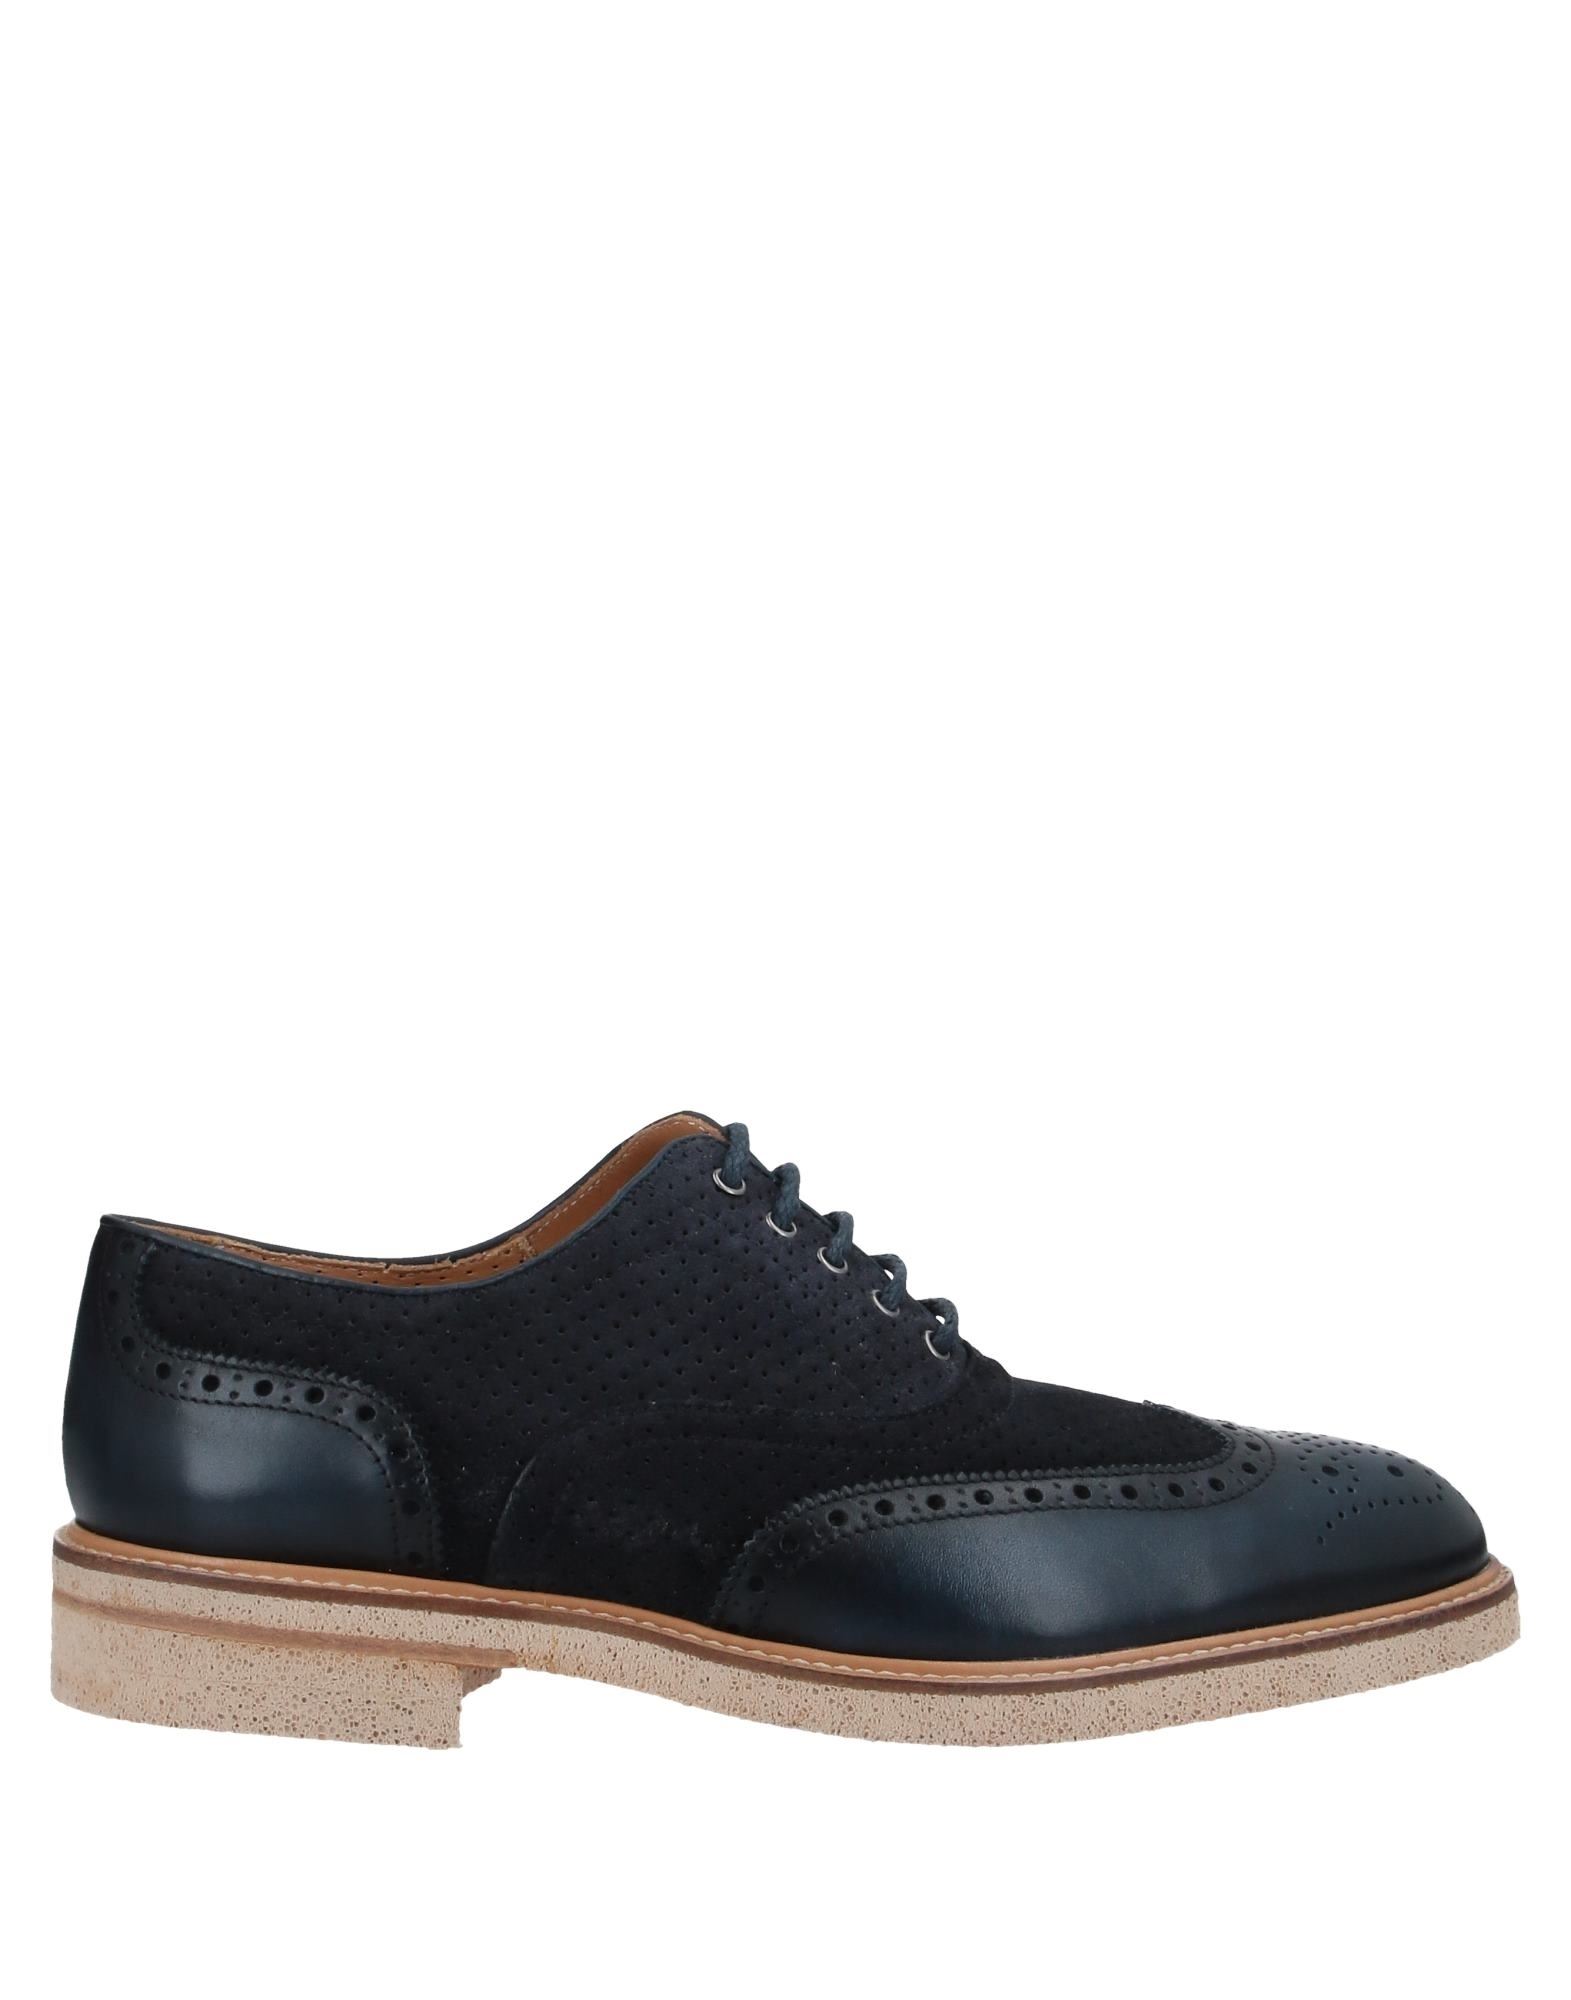 CALCE Lace-up shoes